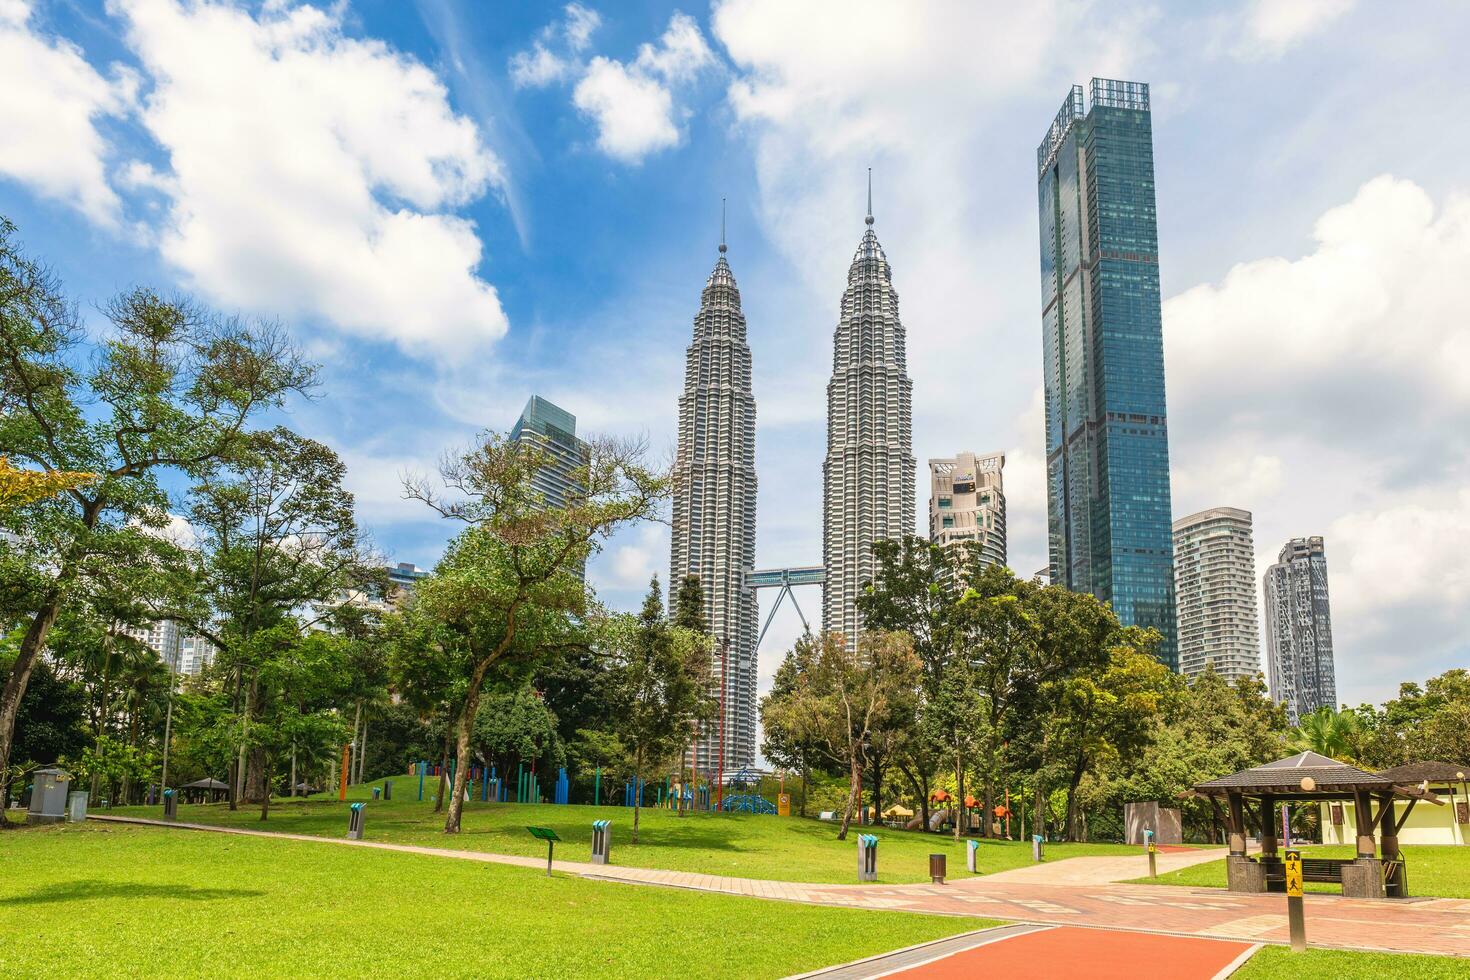 petronas twin towers, the tallest buildings in Kuala Lumpur, malaysia and the tallest twin towers in the world. construction started on 1 March 1993 and completed on 31 August 1999. photo